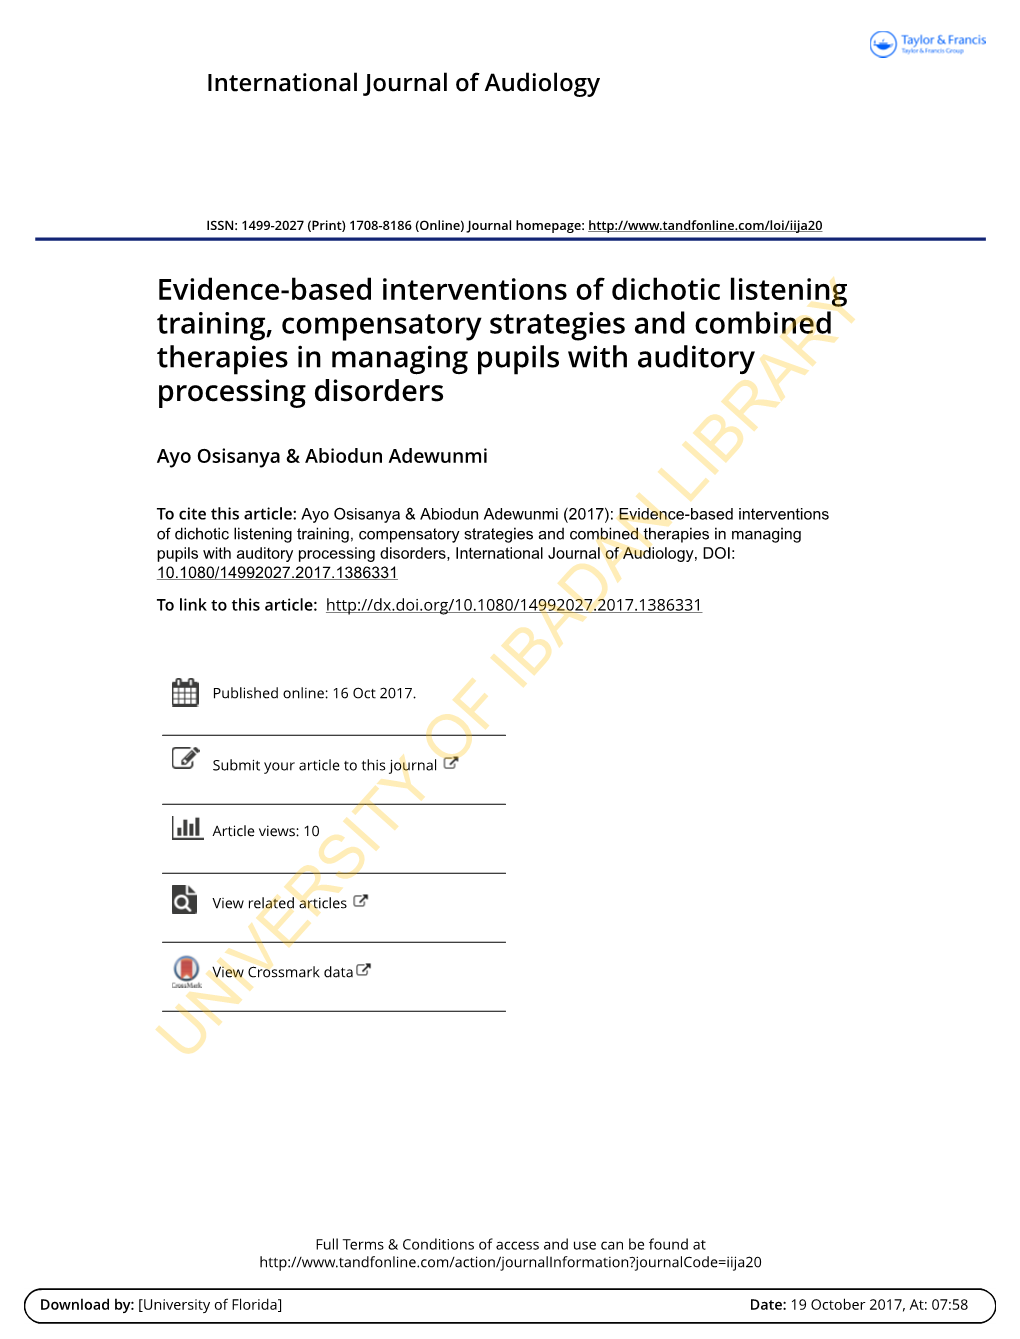 Evidence-Based Interventions of Dichotic Listening Training, Compensatory Strategies and Combined Therapies in Managing Pupils with Auditory Processing Disorders